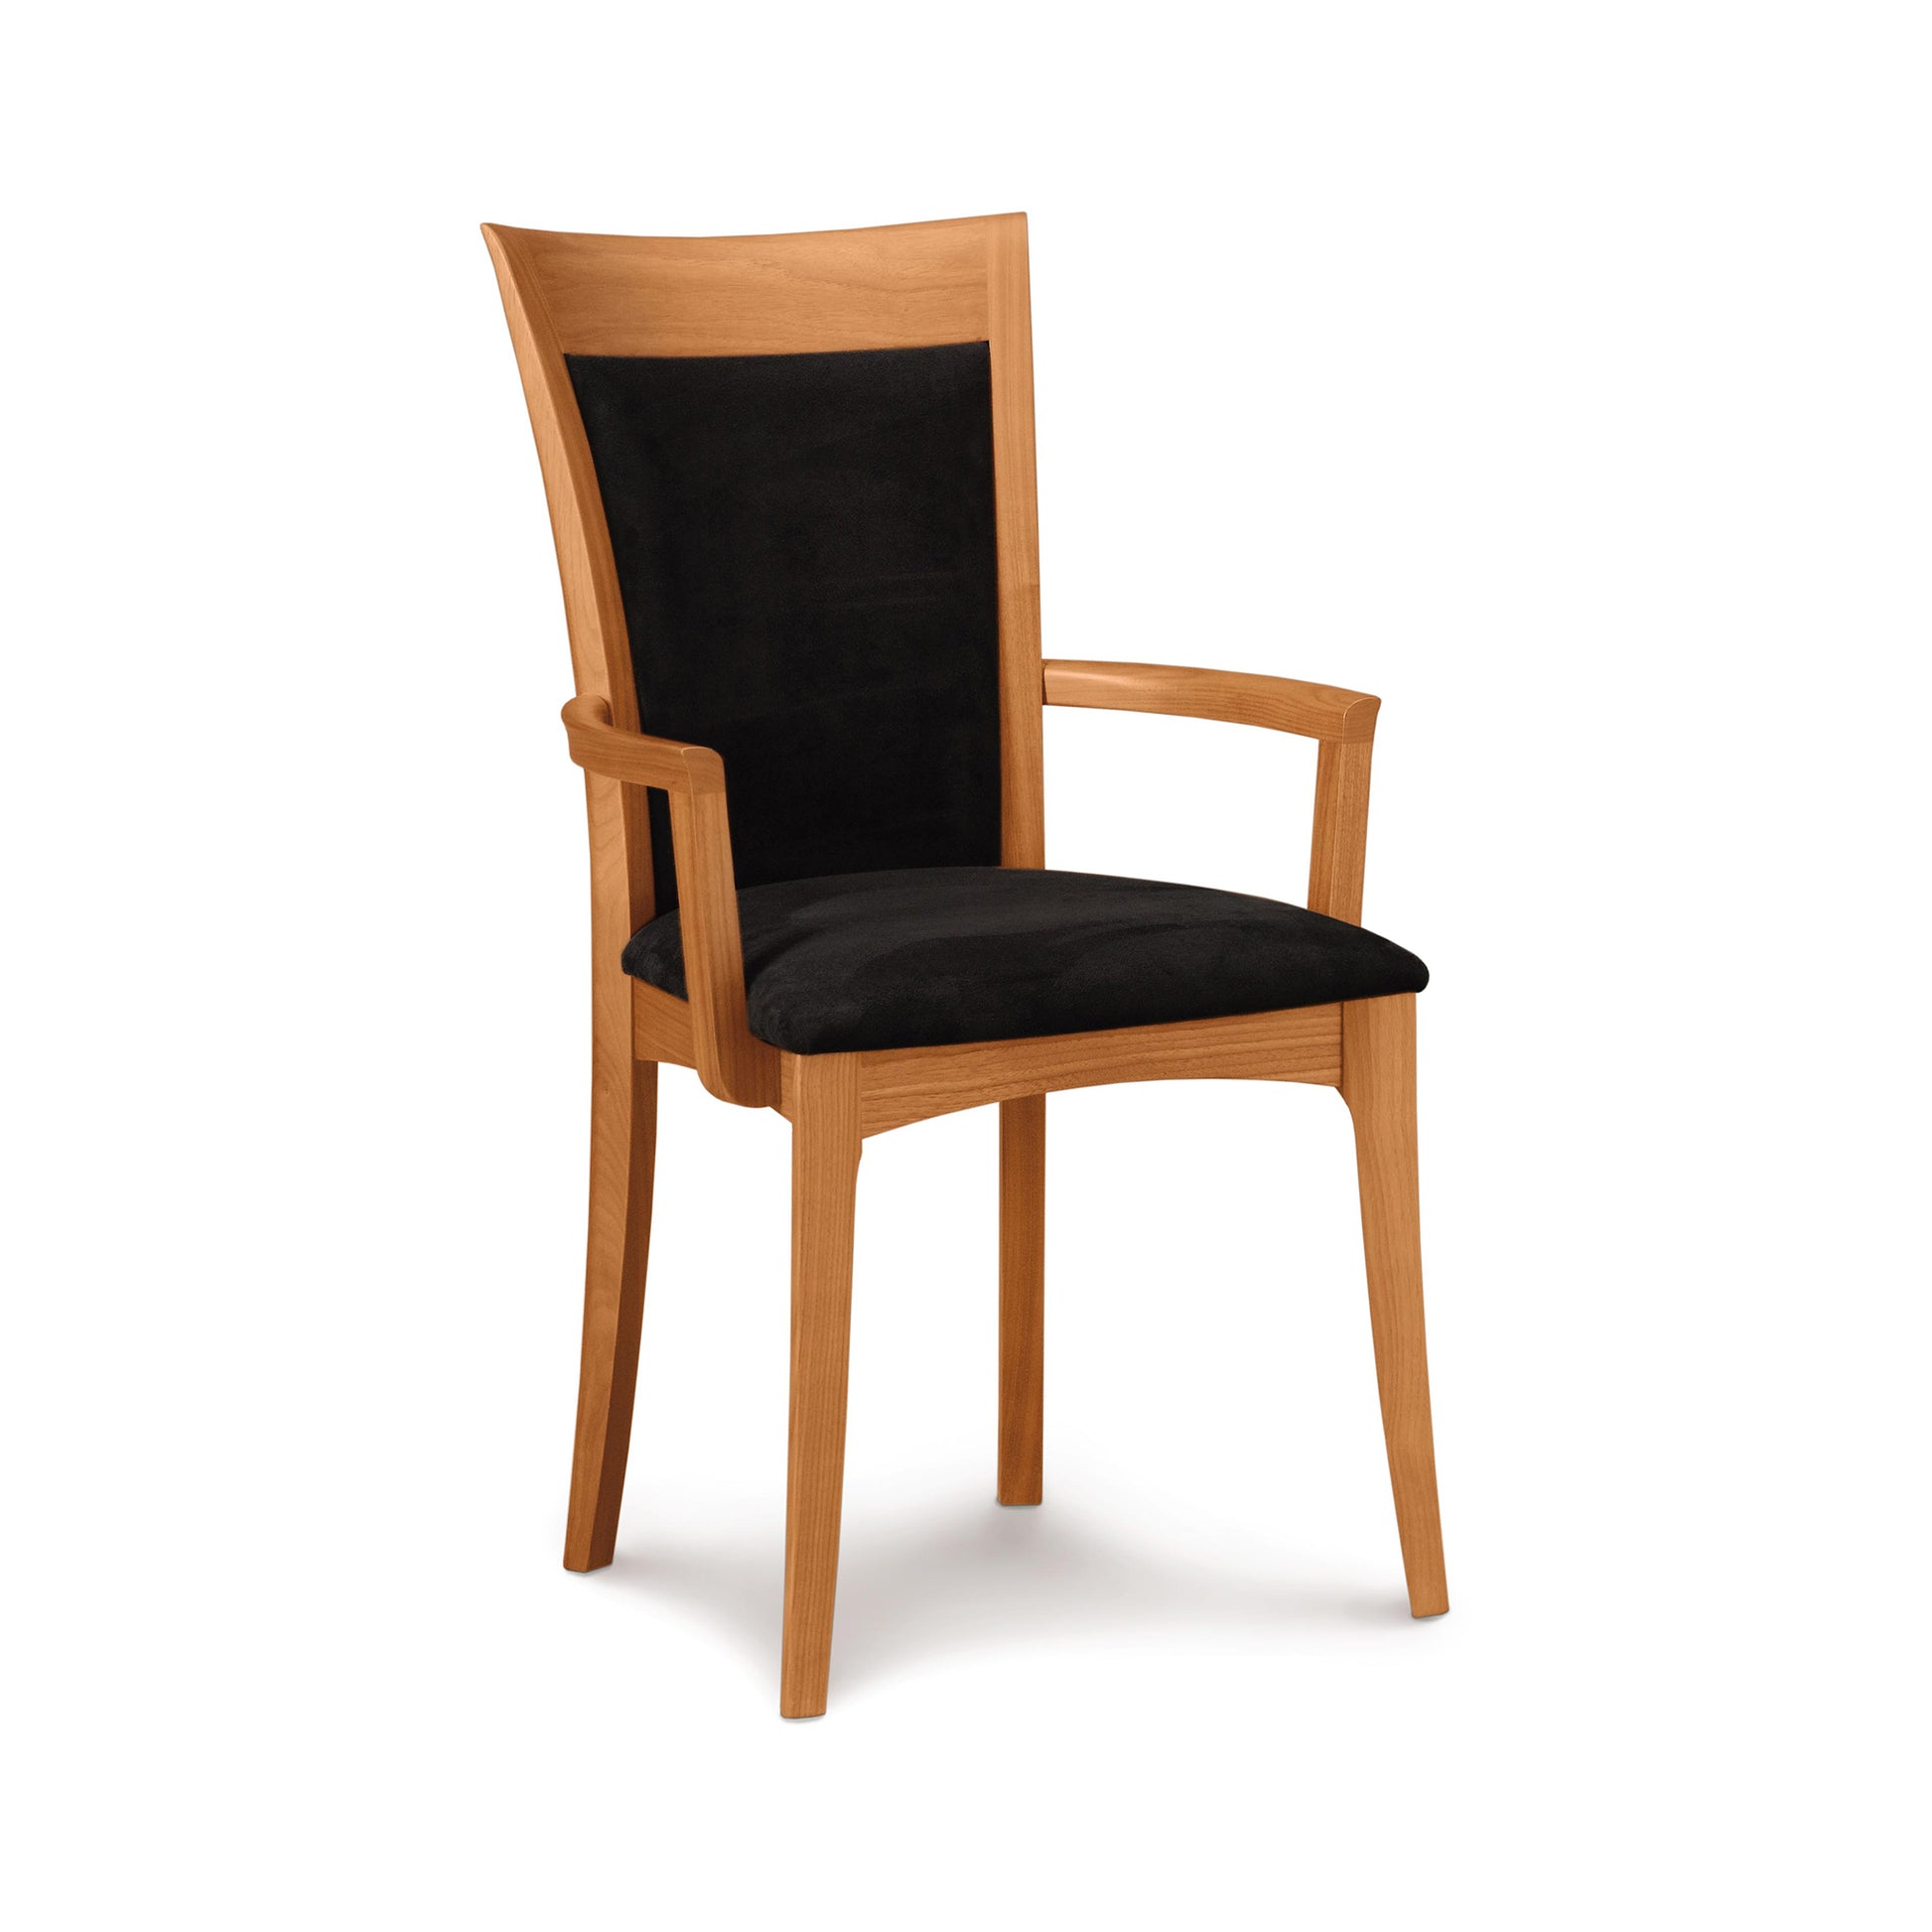 A Copeland Furniture Morgan Shaker Chair with a black upholstered seat and backrest, isolated on a white background.